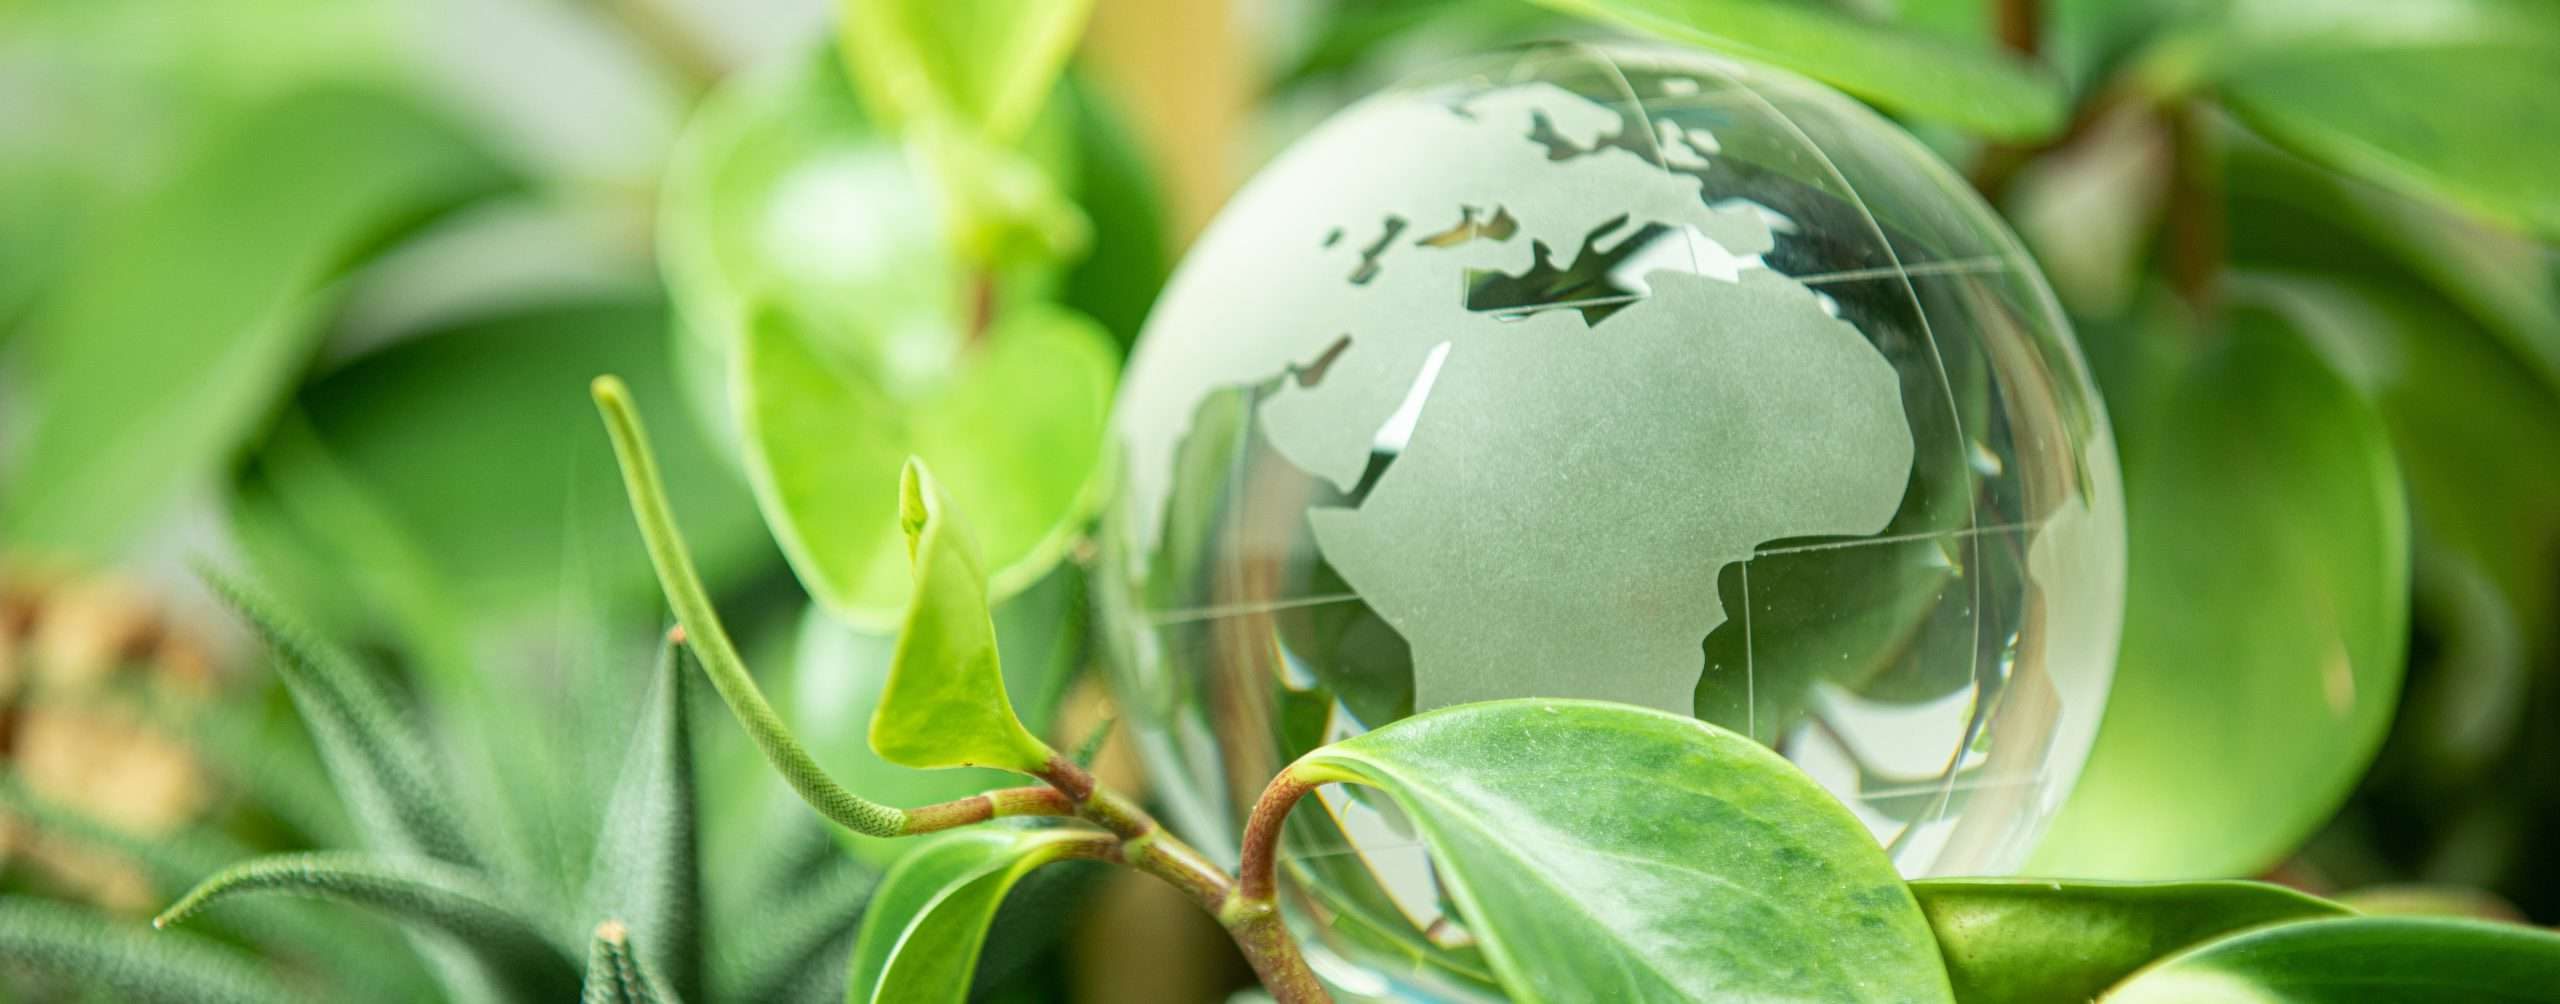 Corporate social responsibility: a green world with a glass ball